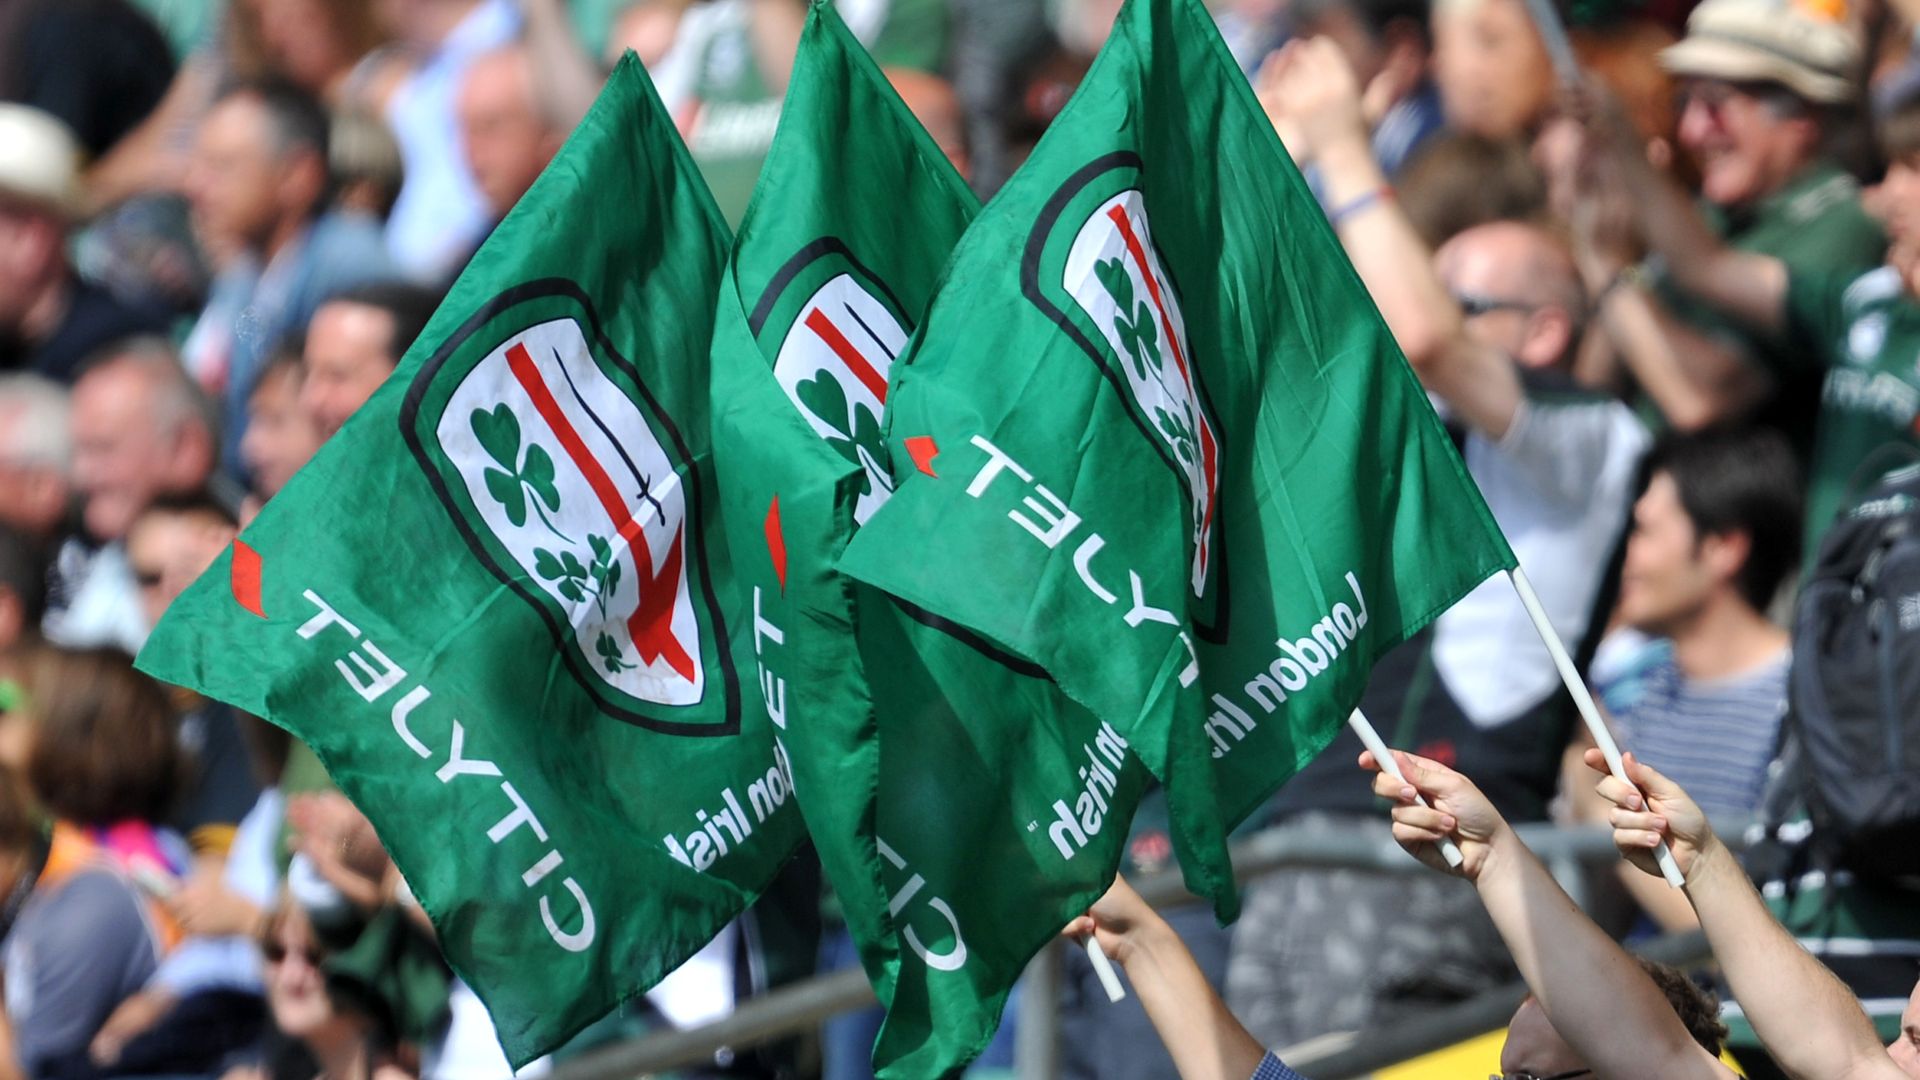 London Irish set to be suspended from Premiership as deadline looms